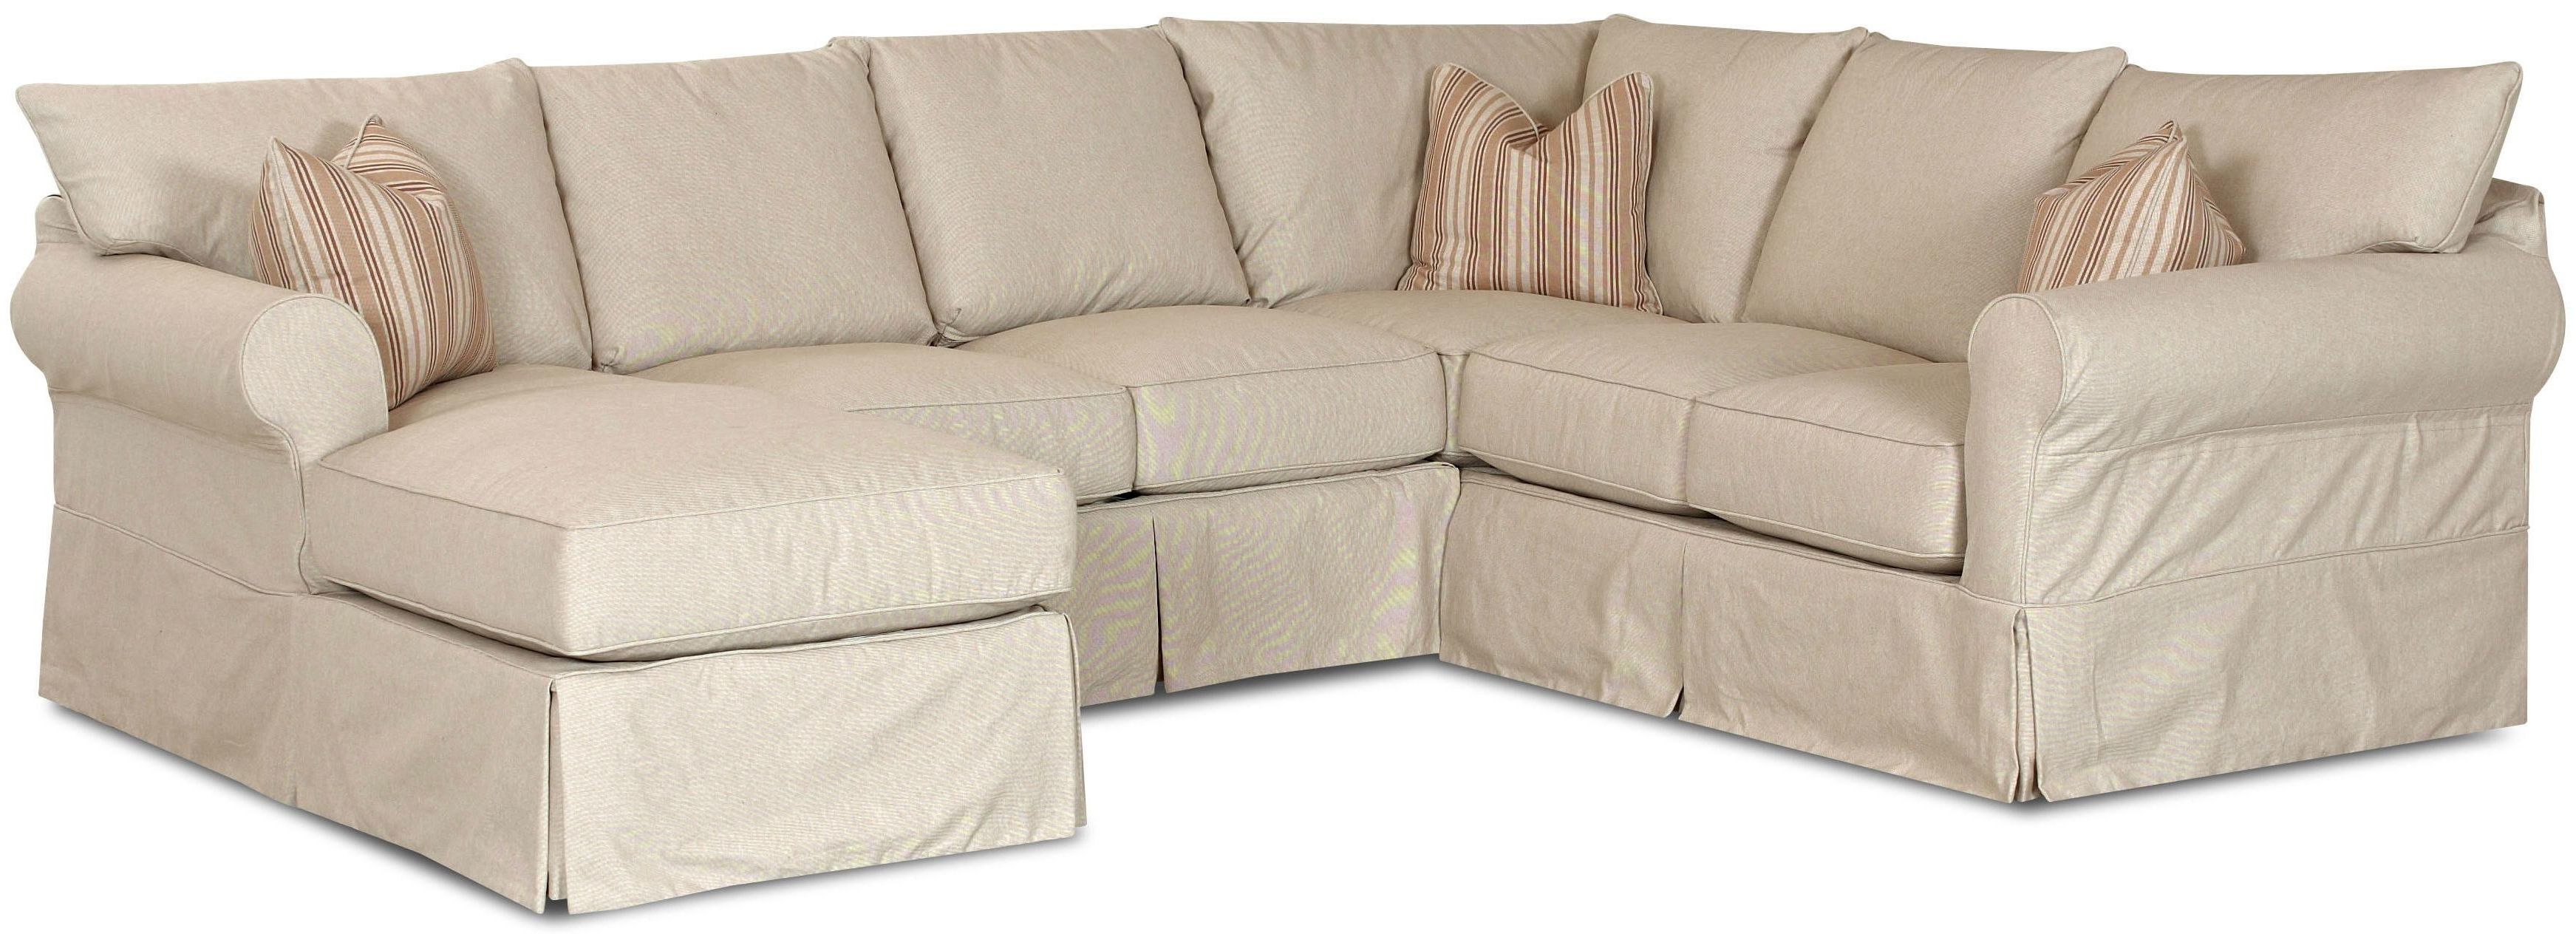 sectional slipcovers target